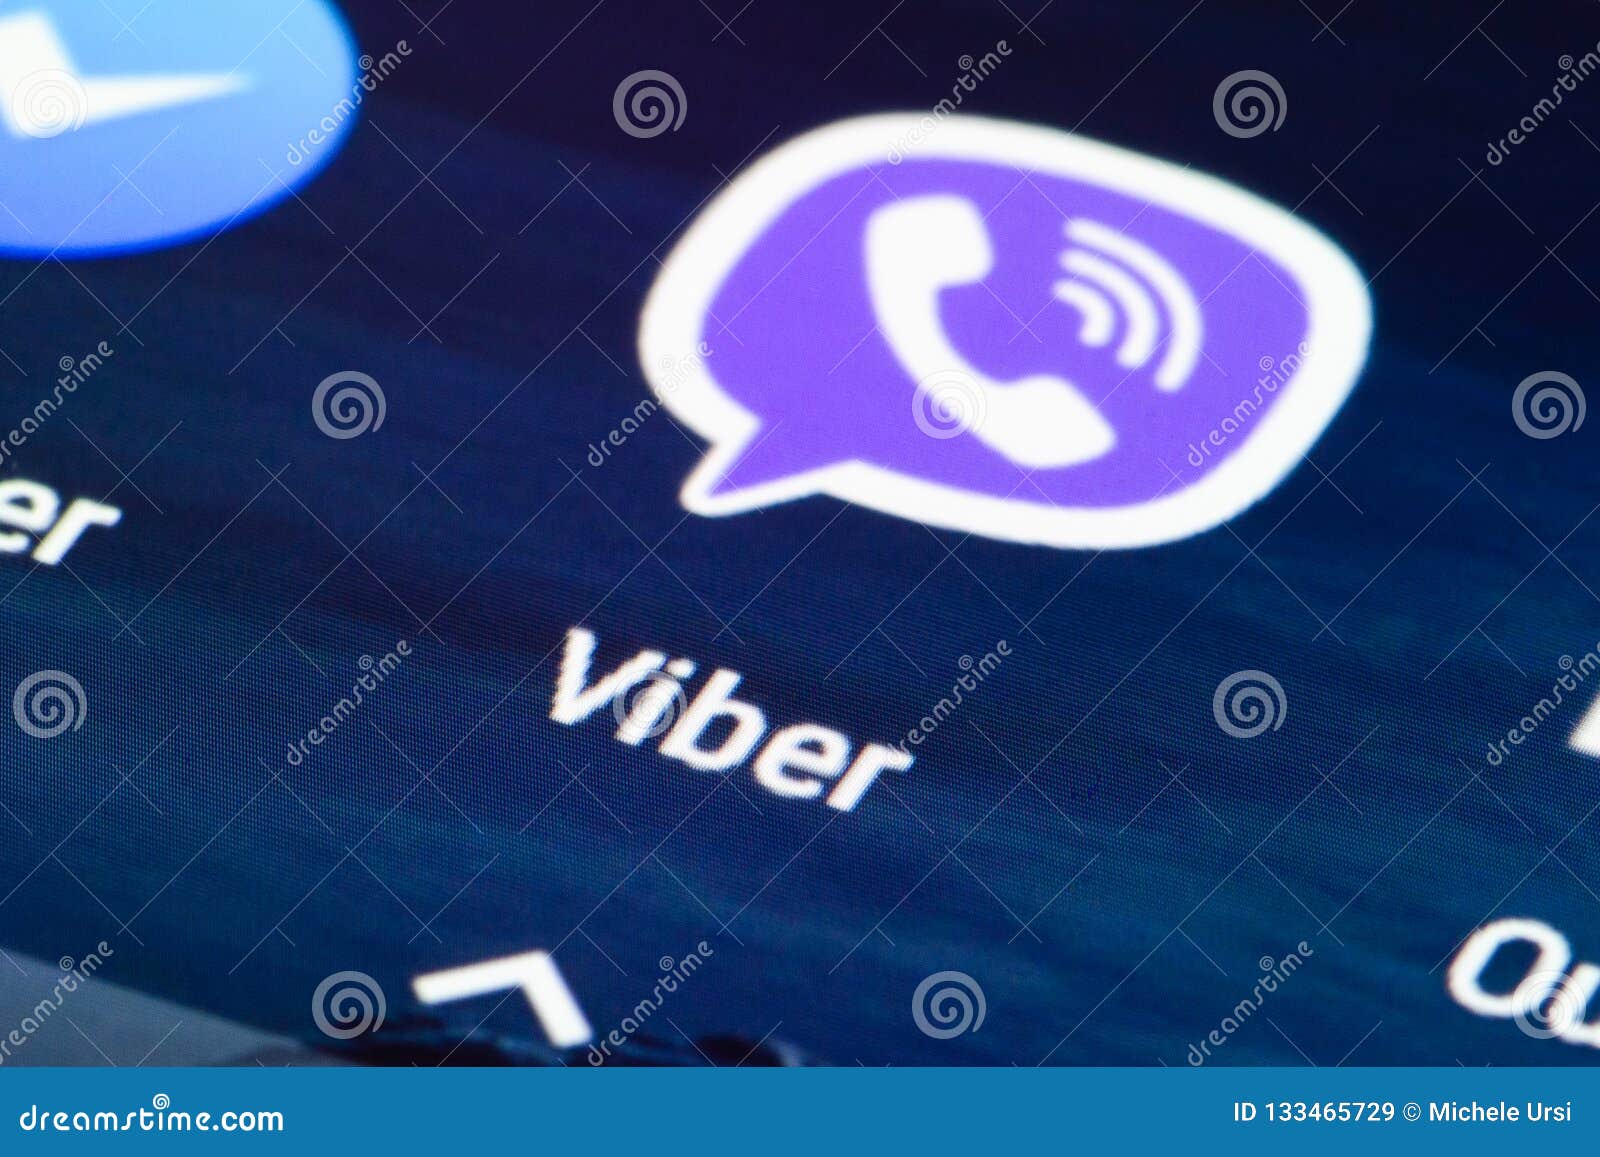 if you call viber over lte